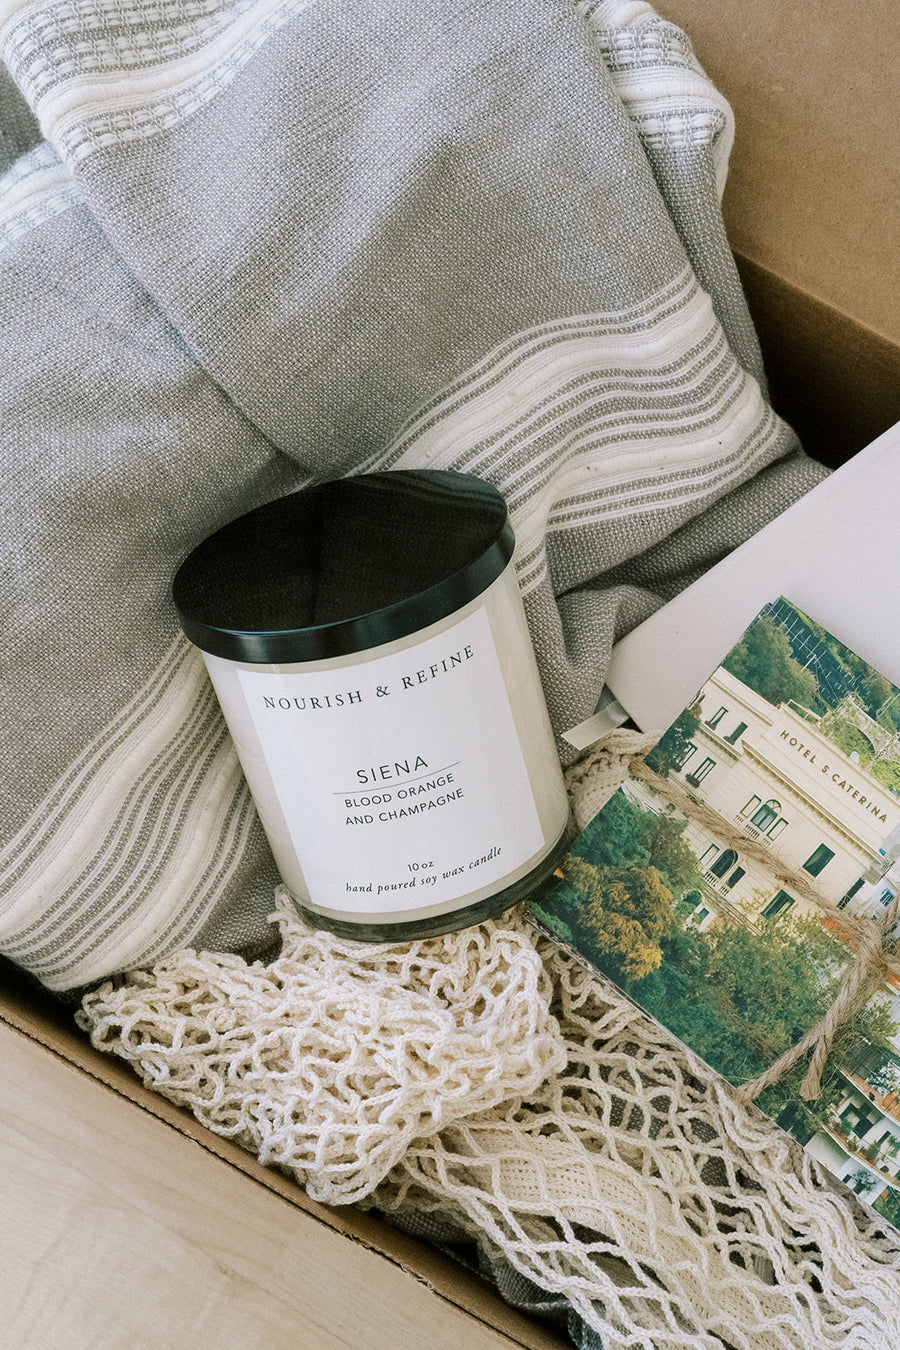 Siena 'Blood Orange and Champagne' Candle